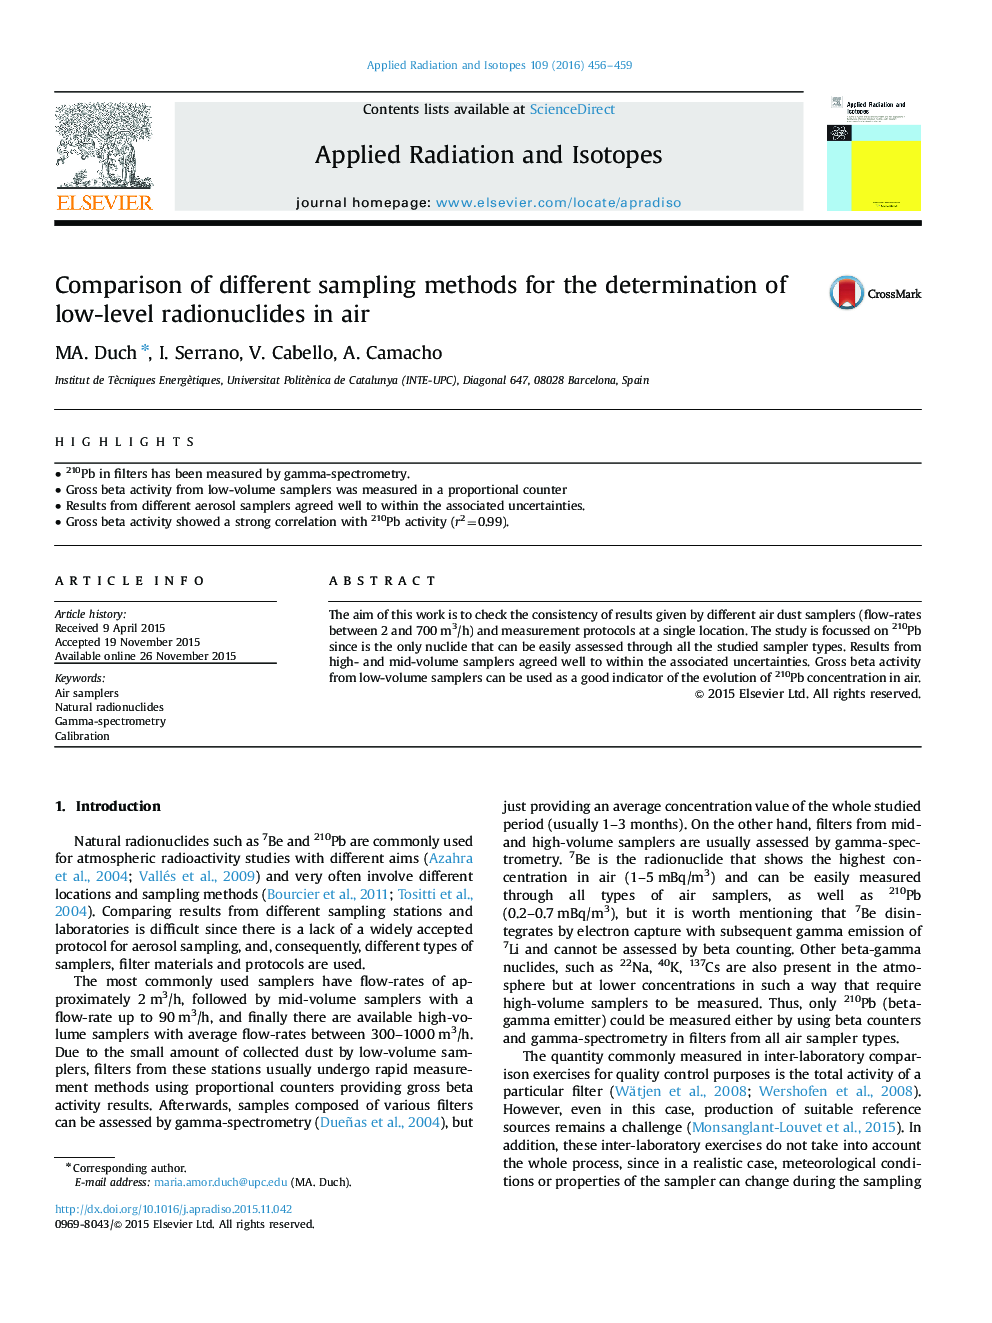 Comparison of different sampling methods for the determination of low-level radionuclides in air